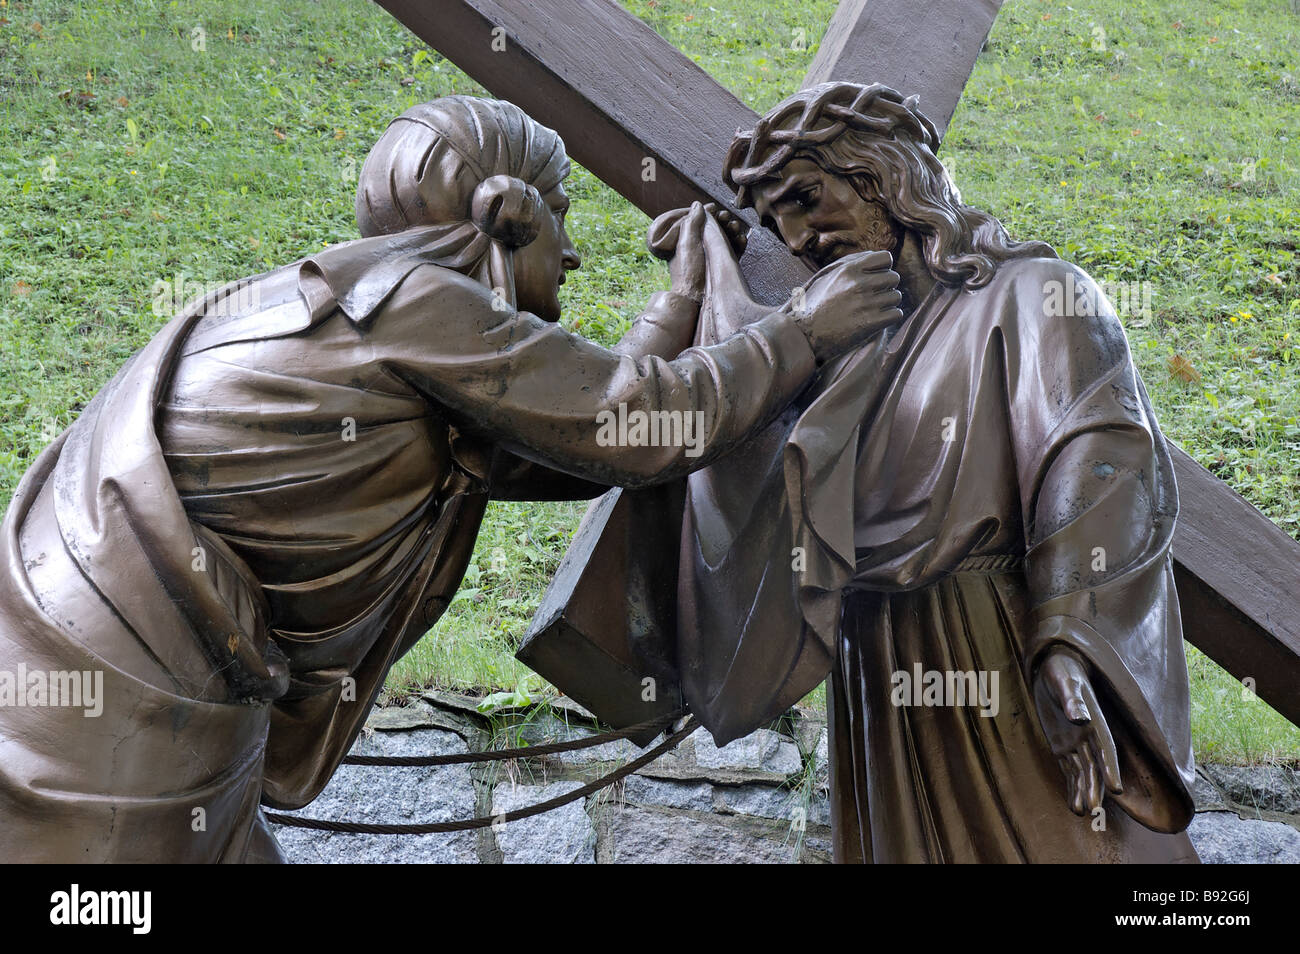 Veronica wipes the face of Jesus from the Stations of the Cross Stock Photo